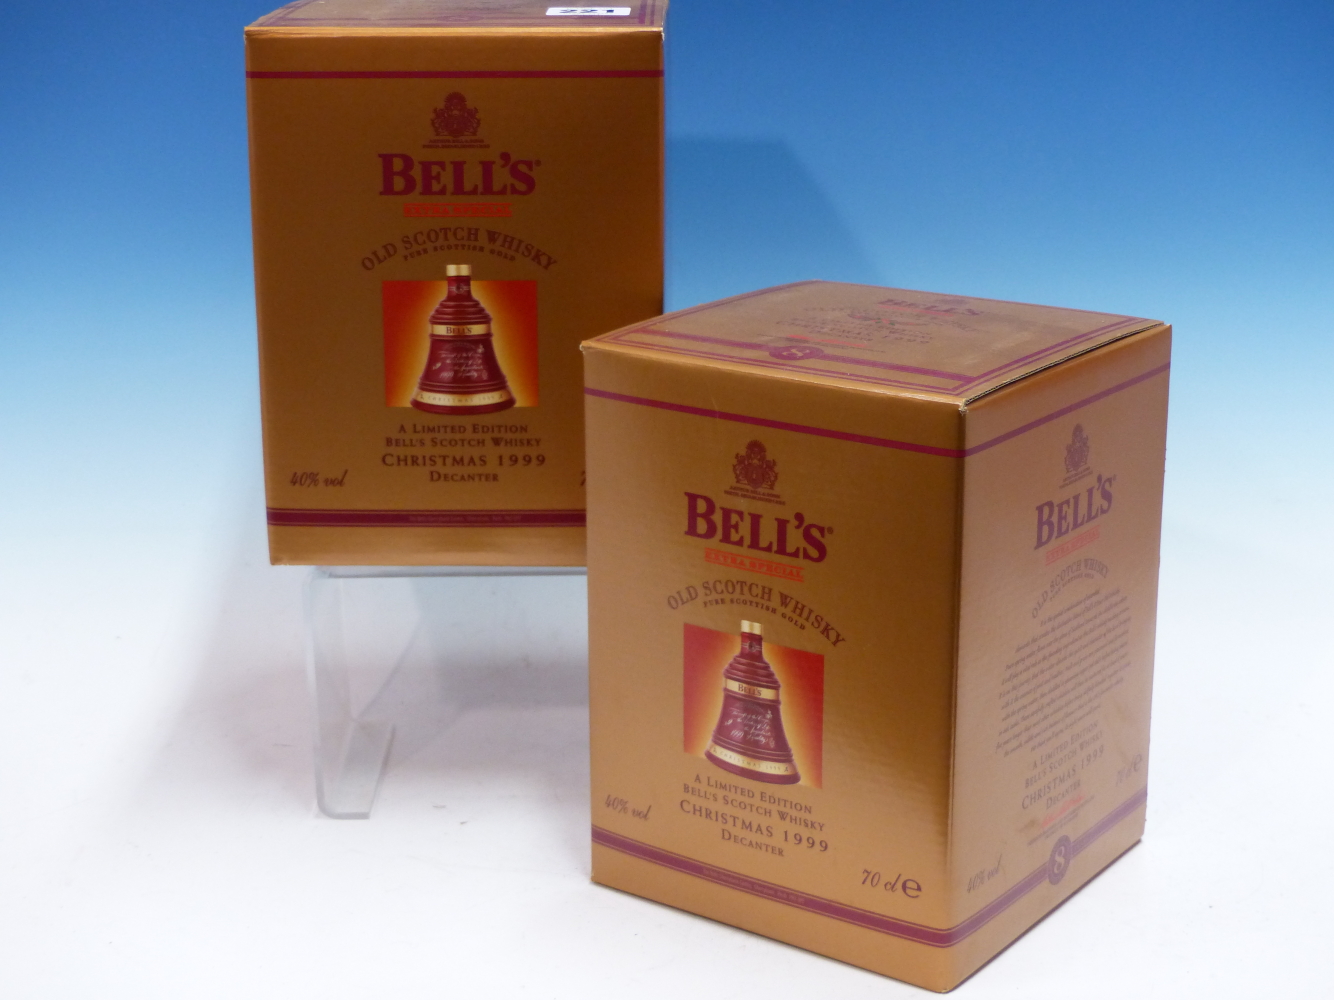 WHISKY. BELLS CHRISTMAS 1999 EDITION 2 x BOTTLES, BOXED. (2)